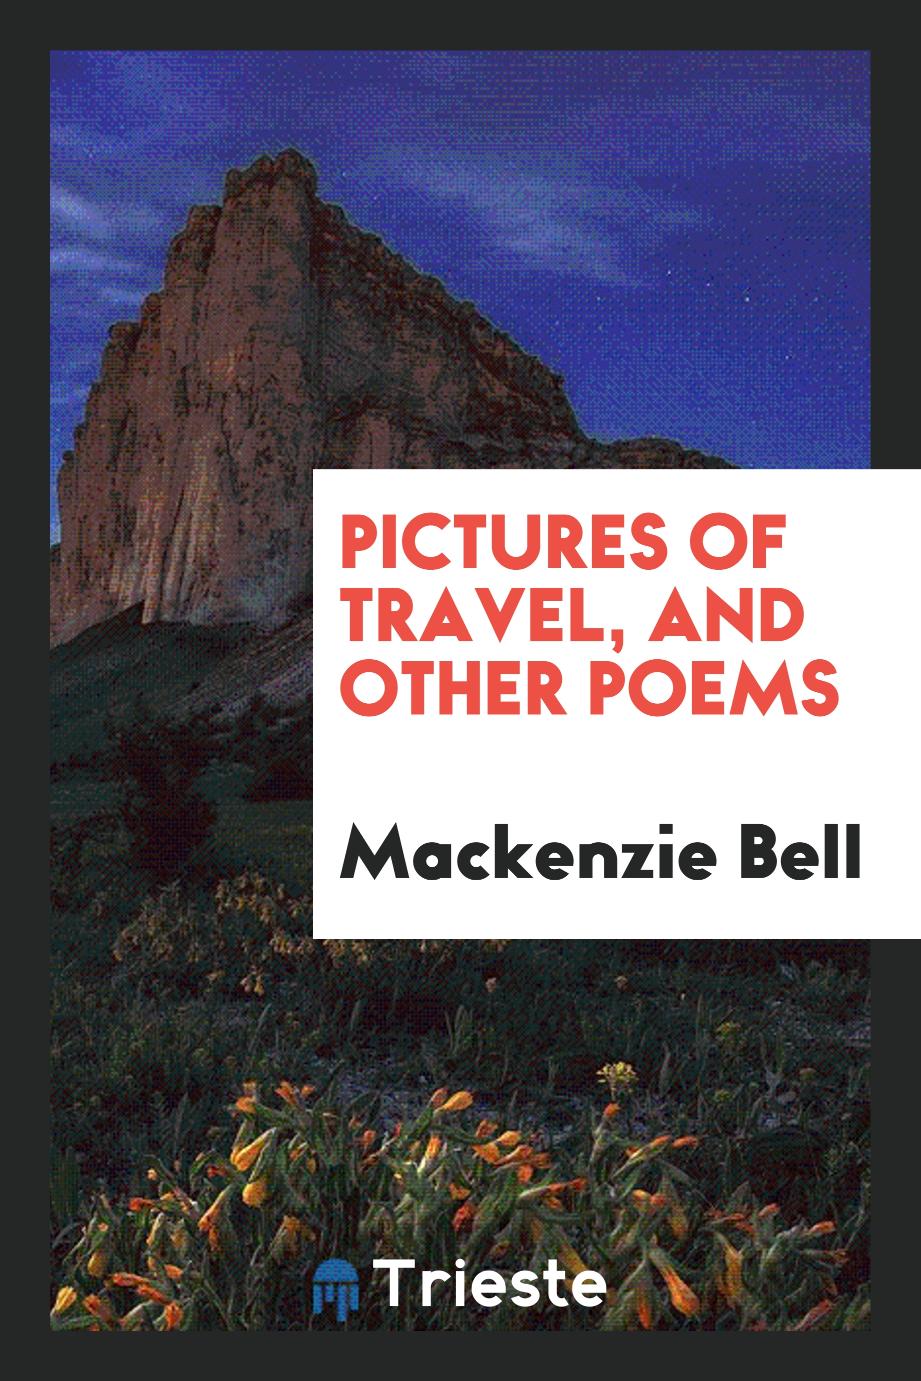 Pictures of travel, and other poems